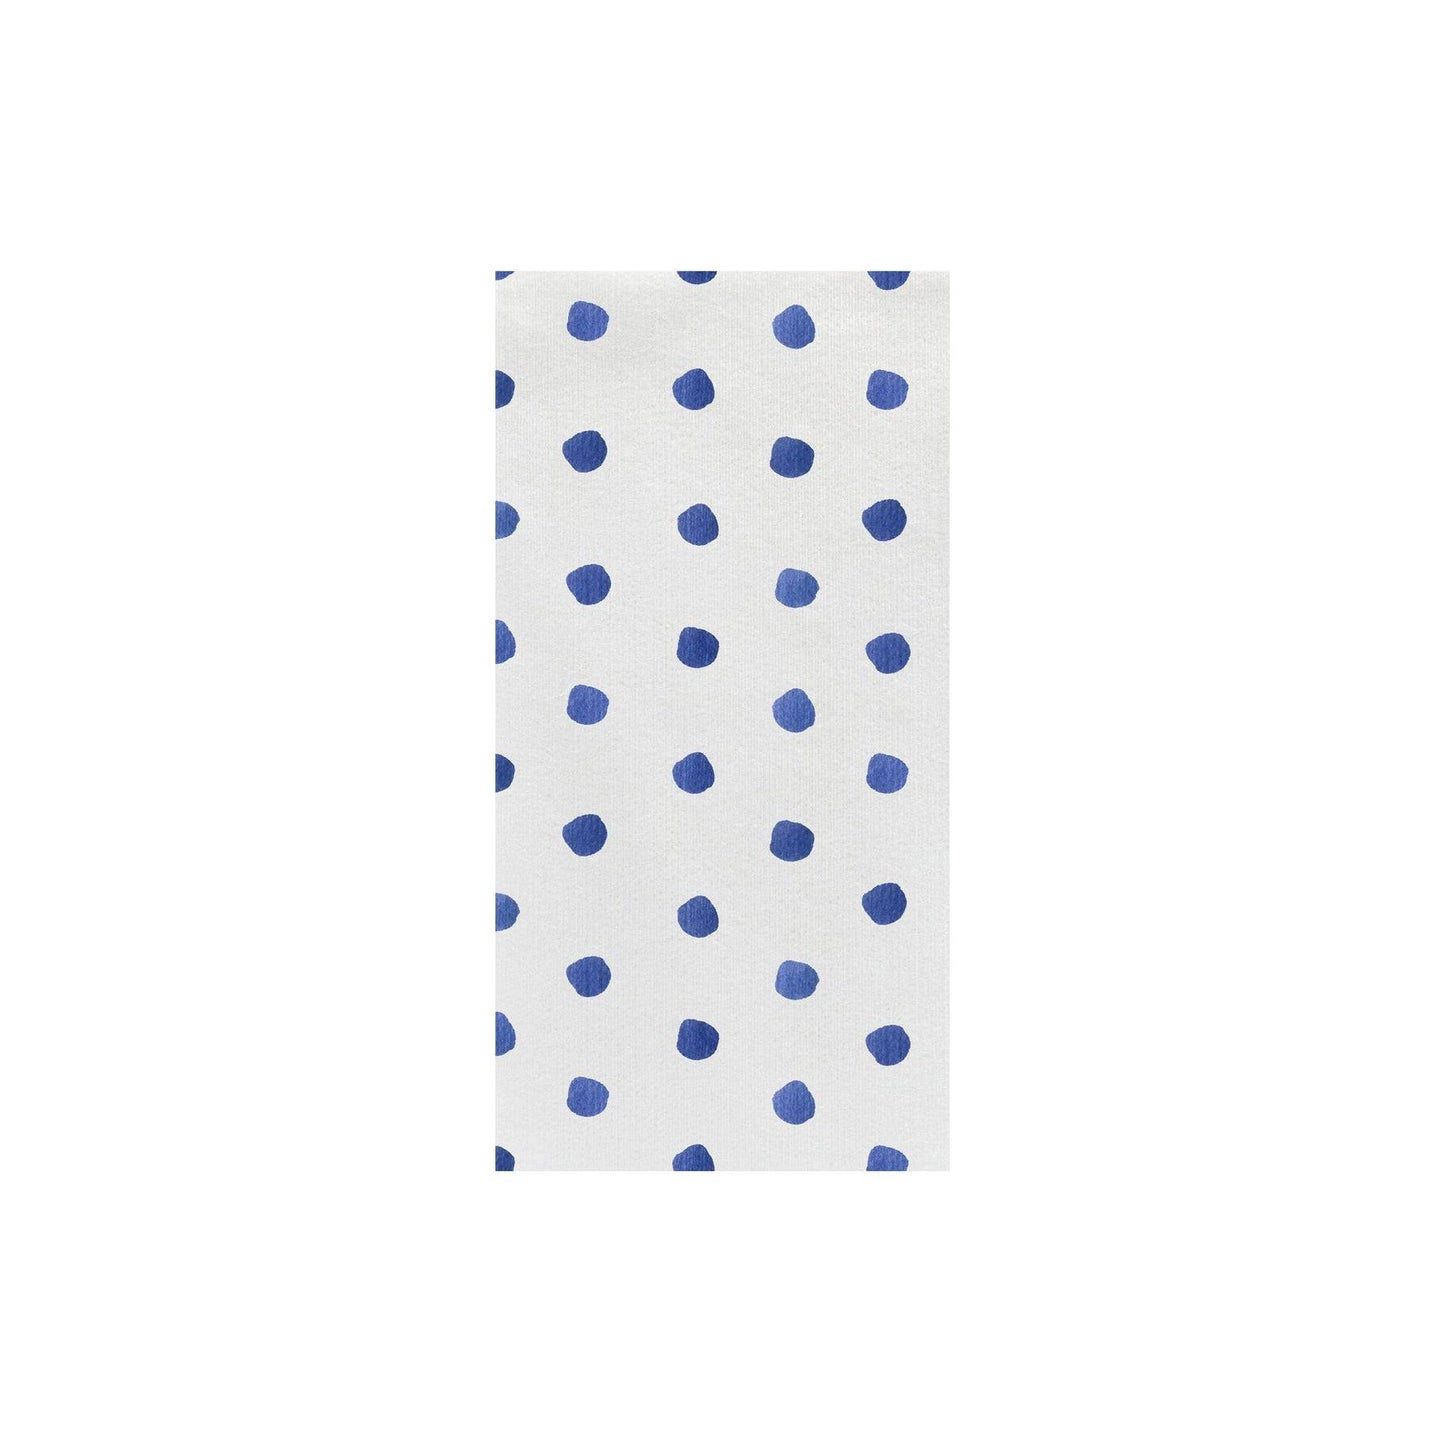 VIETRI - PAPERSOFT NAPKINS DOT GUEST TOWELS IN LIGHT BLUE - Findlay Rowe Designs